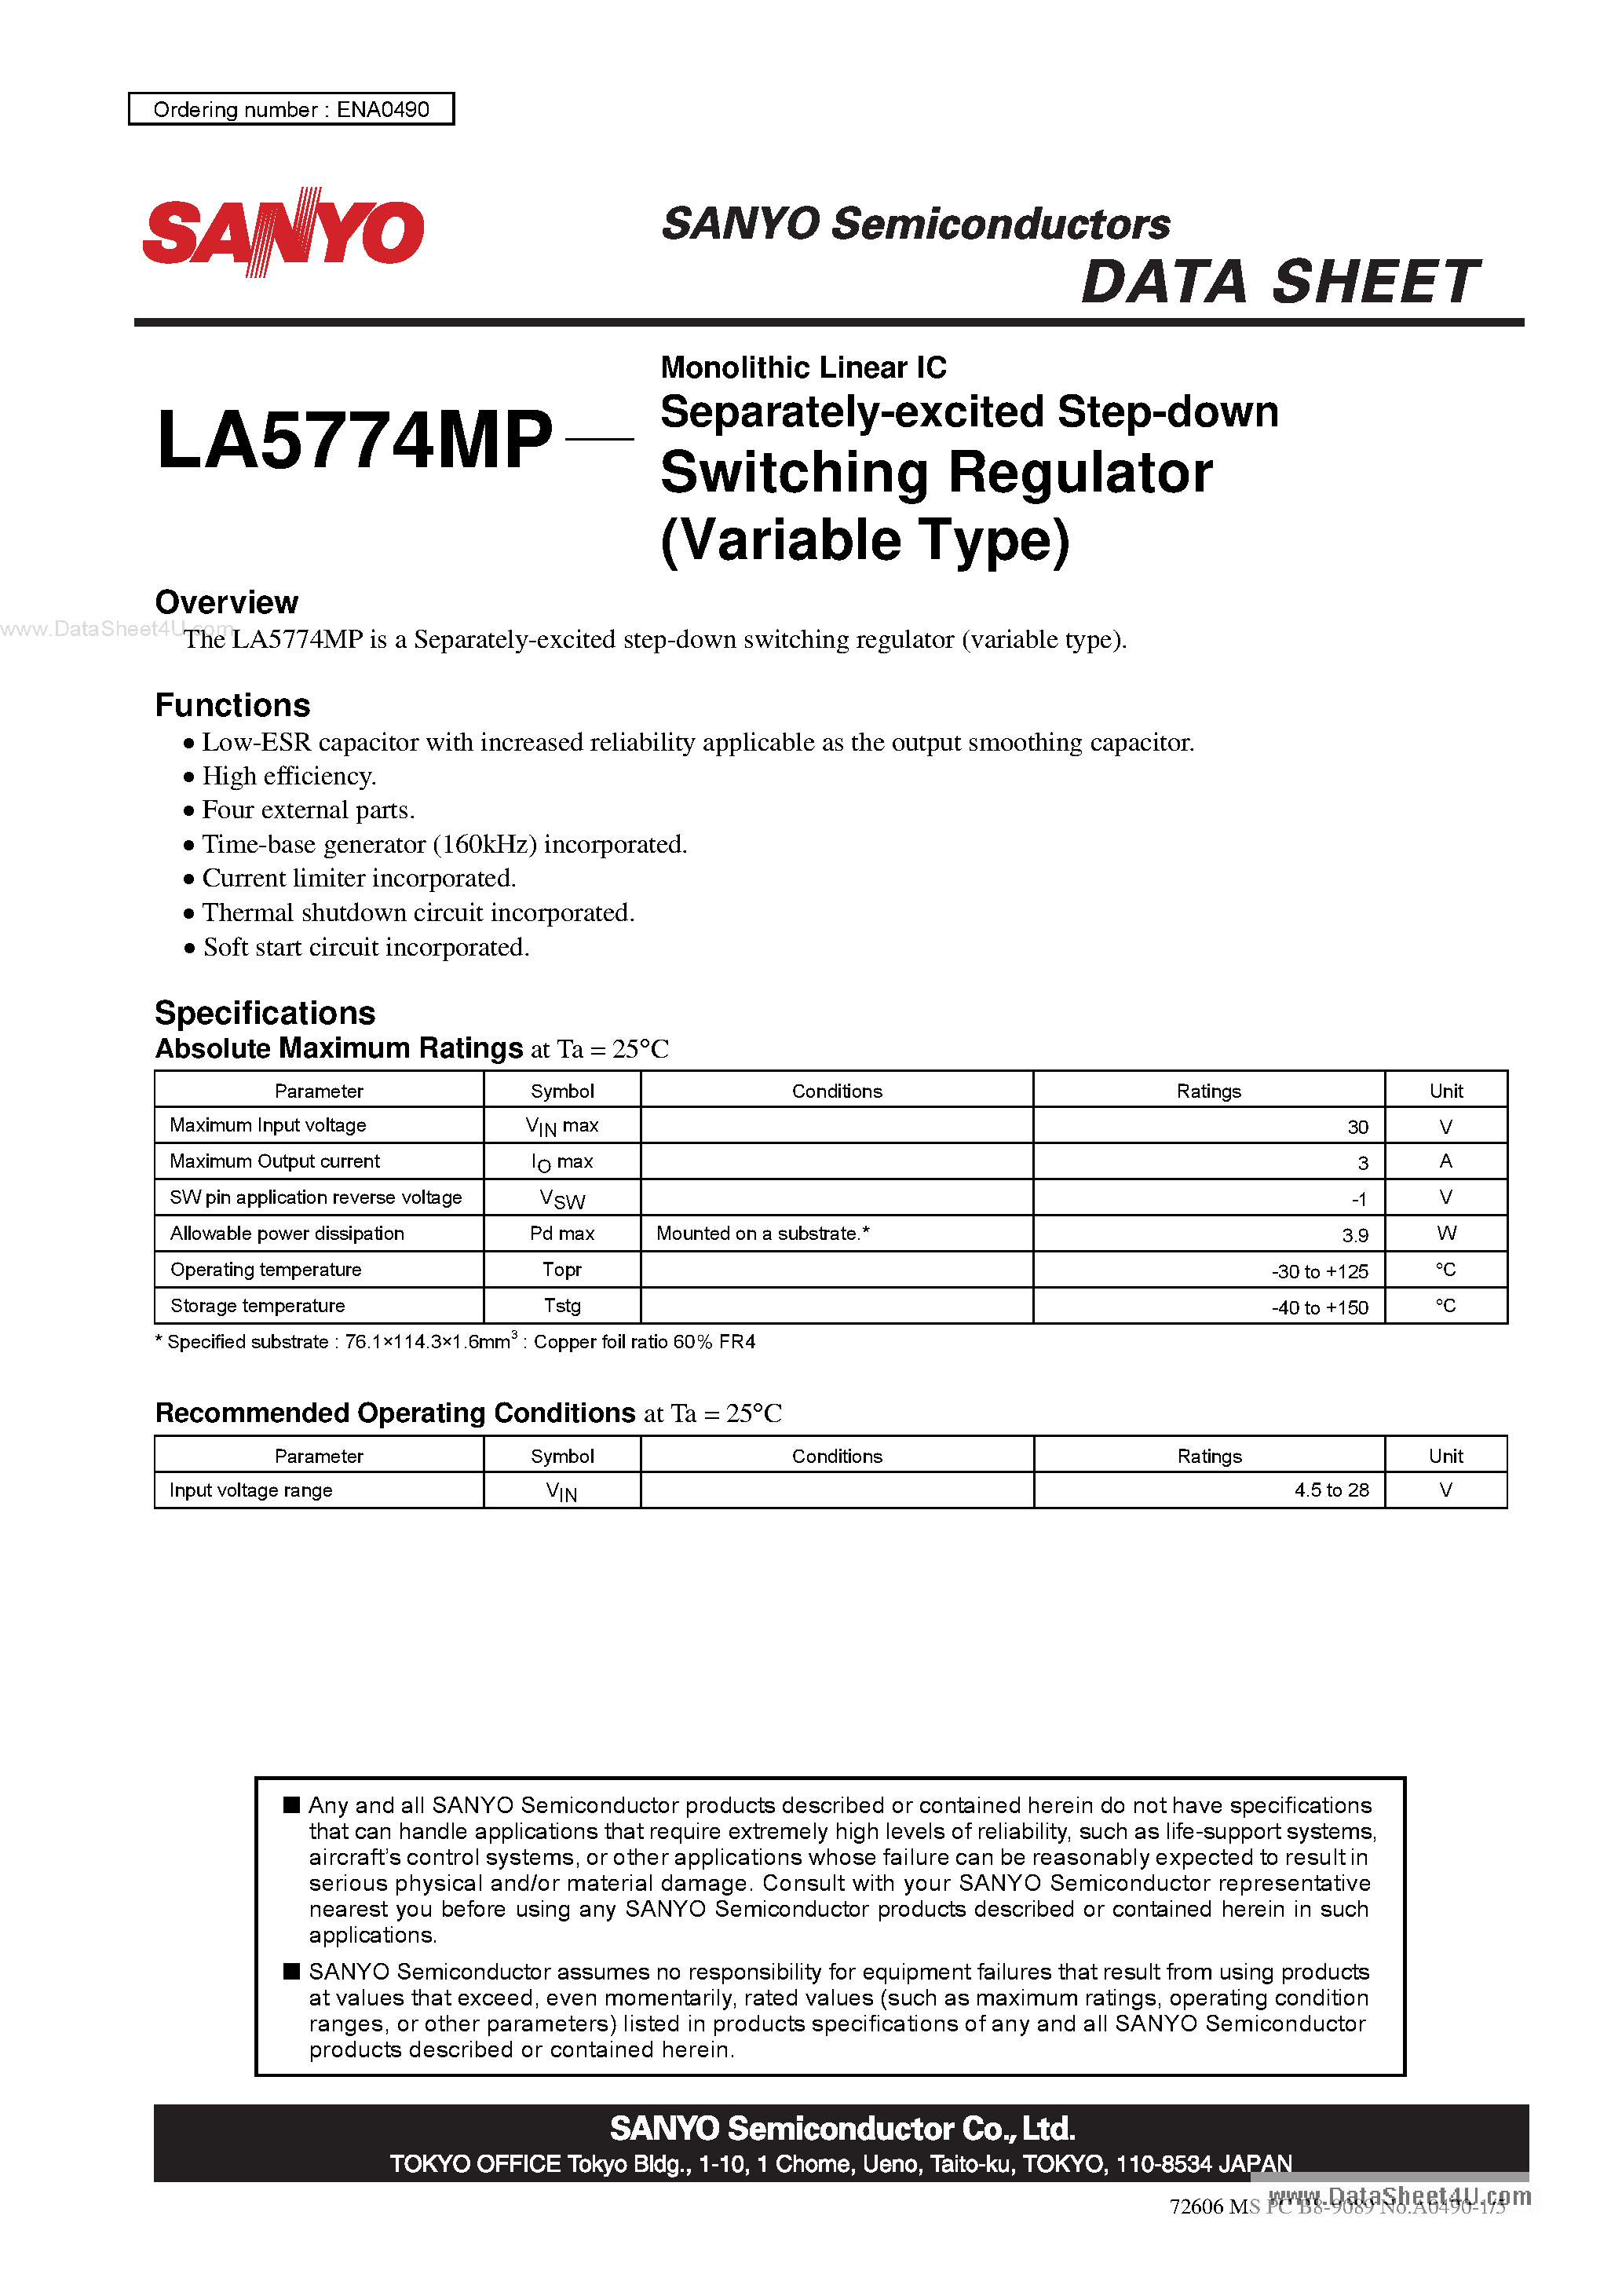 Даташит LA5774MP - Monolithic Linear IC Separately-Excited Step-Down Switching Regulator страница 1